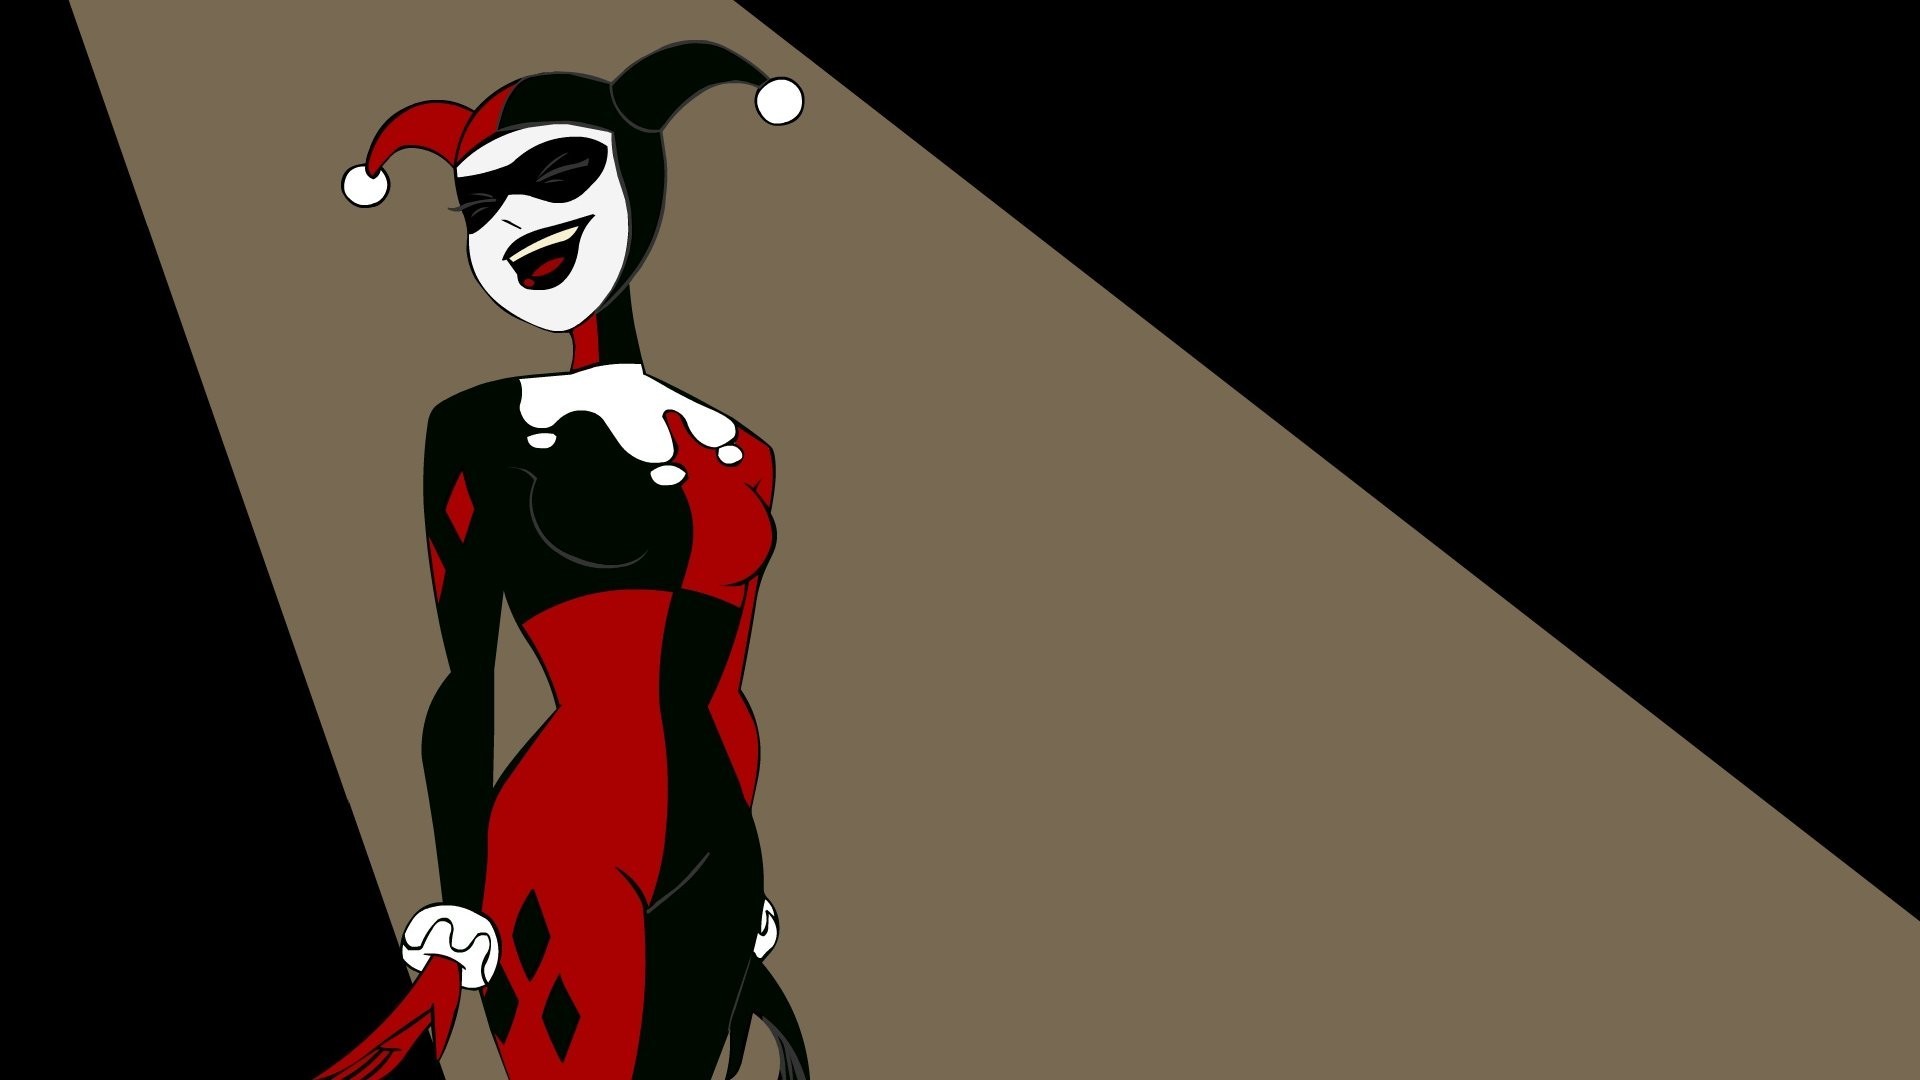 Harley Quinn Costume HD Wallpaper With Resolution 1920X1080 pixel. You can make this wallpaper for your Desktop Computer Backgrounds, Mac Wallpapers, Android Lock screen or iPhone Screensavers